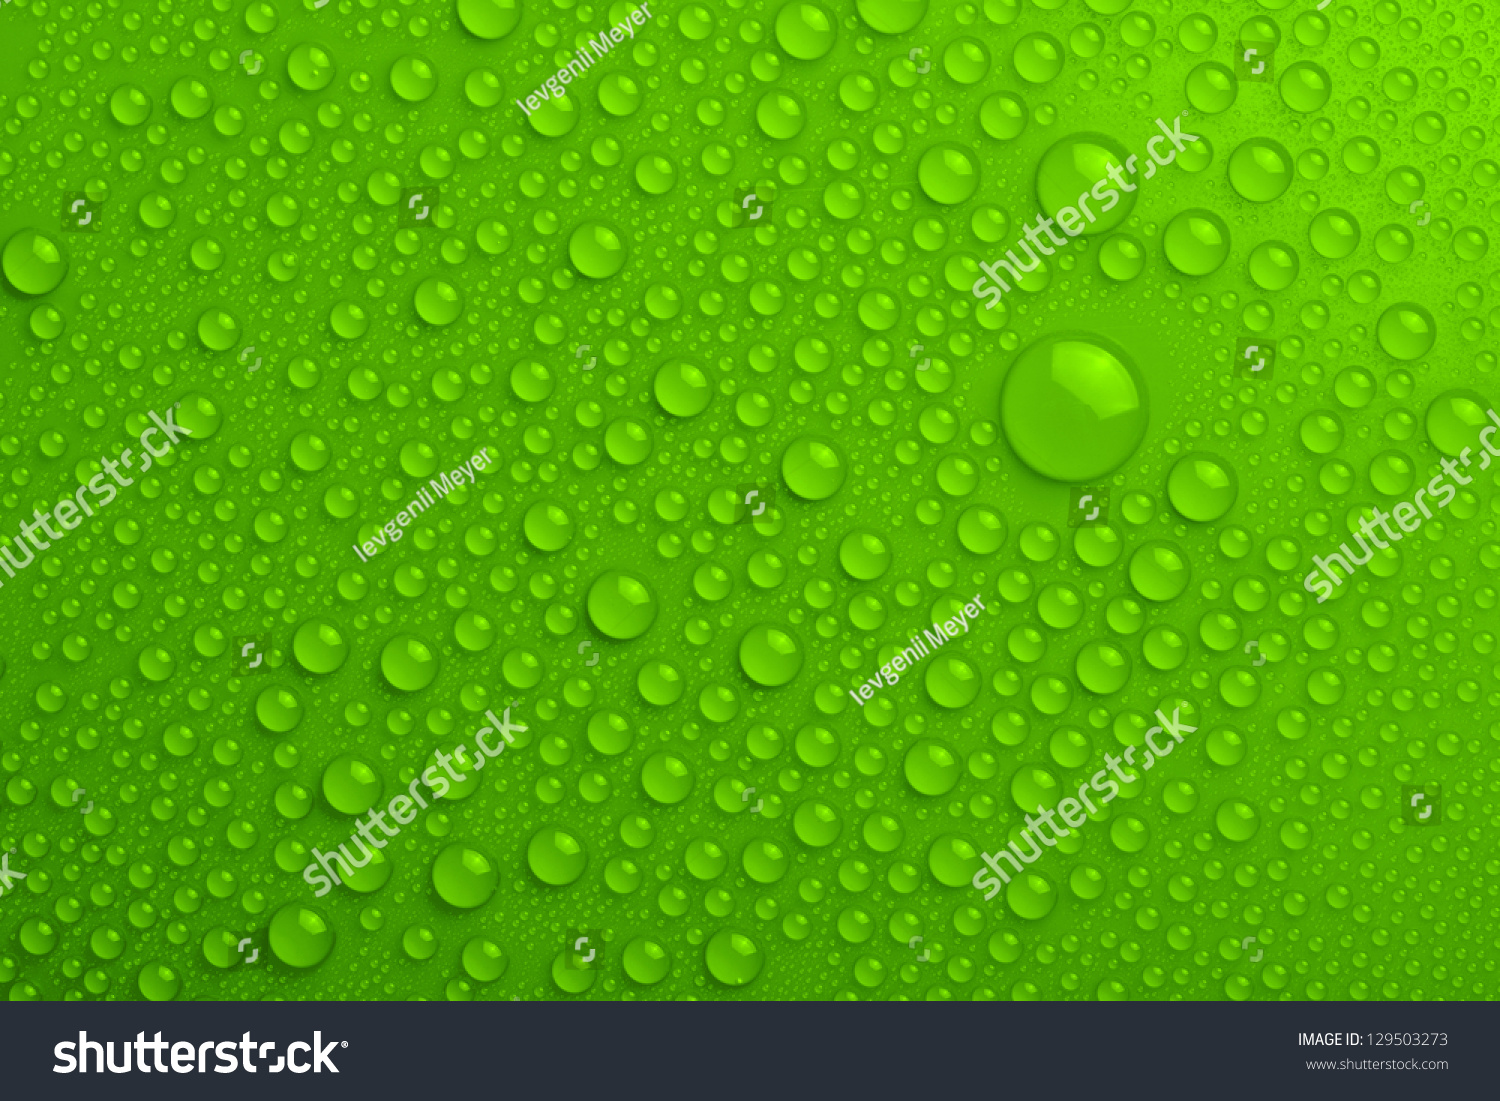 Water Drops On Green Background Stock Photo 129503273 : Shutterstock